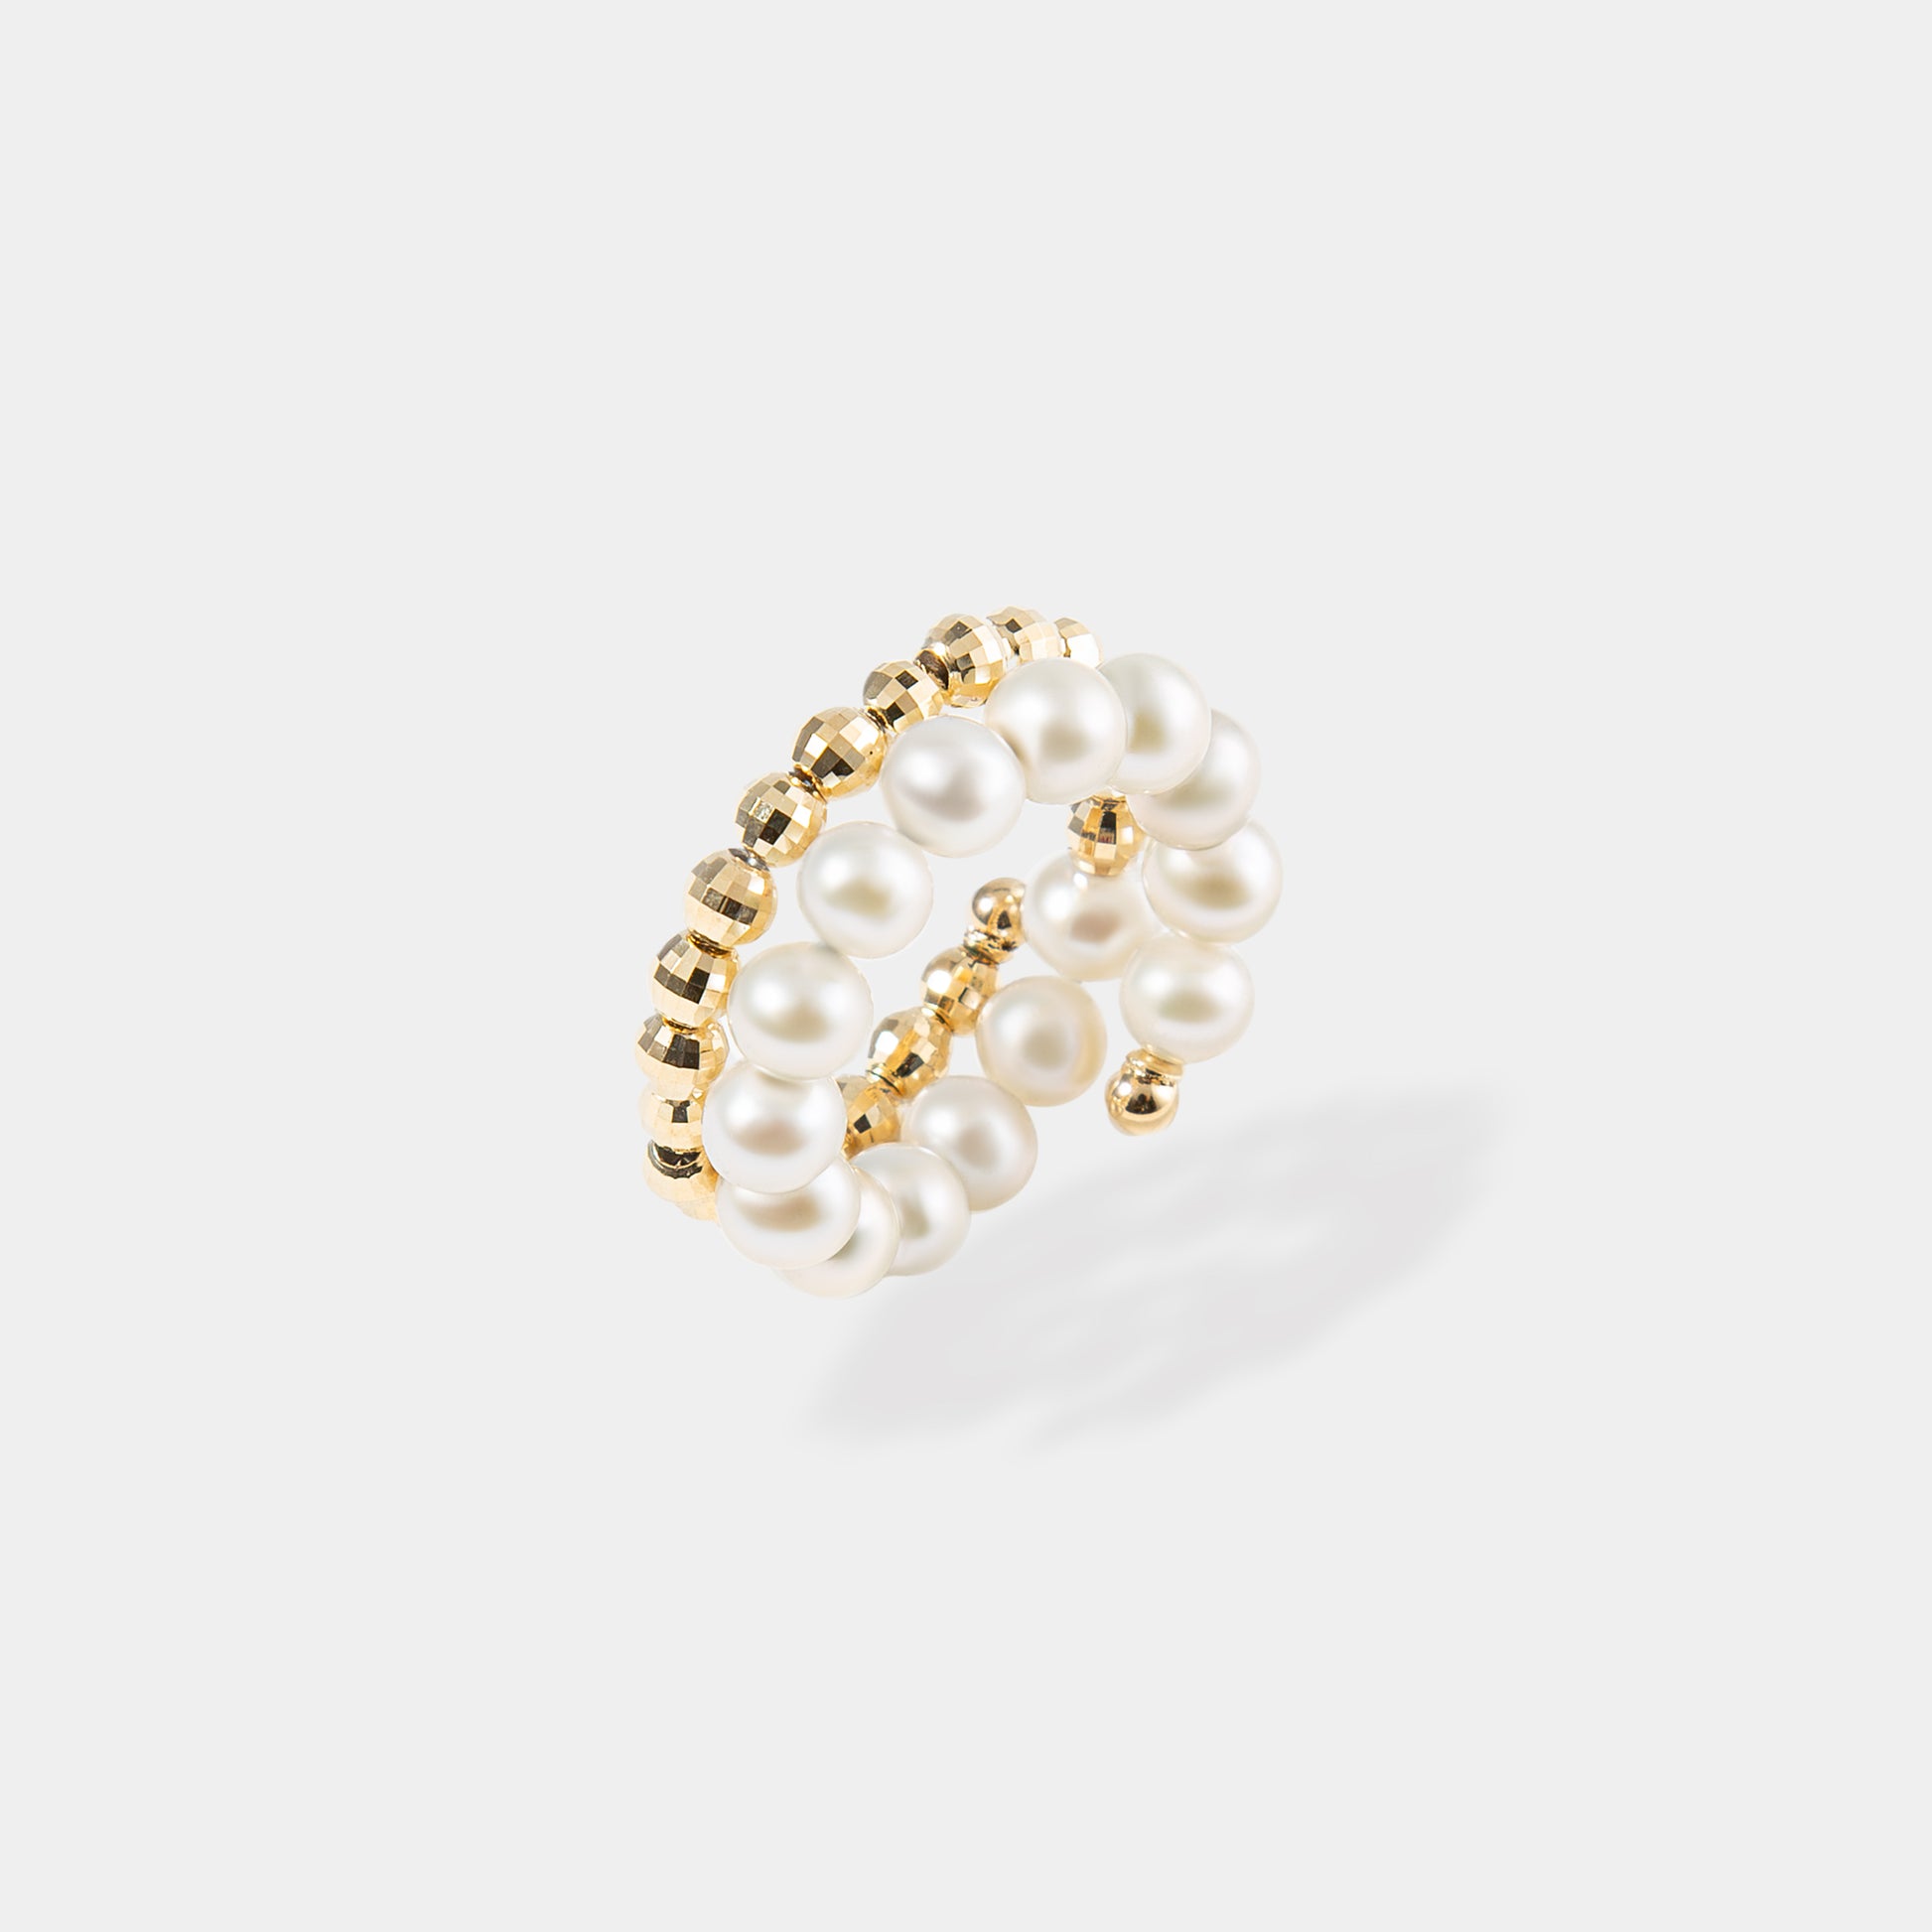 Elegant gold and white pearl ring with a spiral design, perfect for adding a touch of sophistication to any outfit.